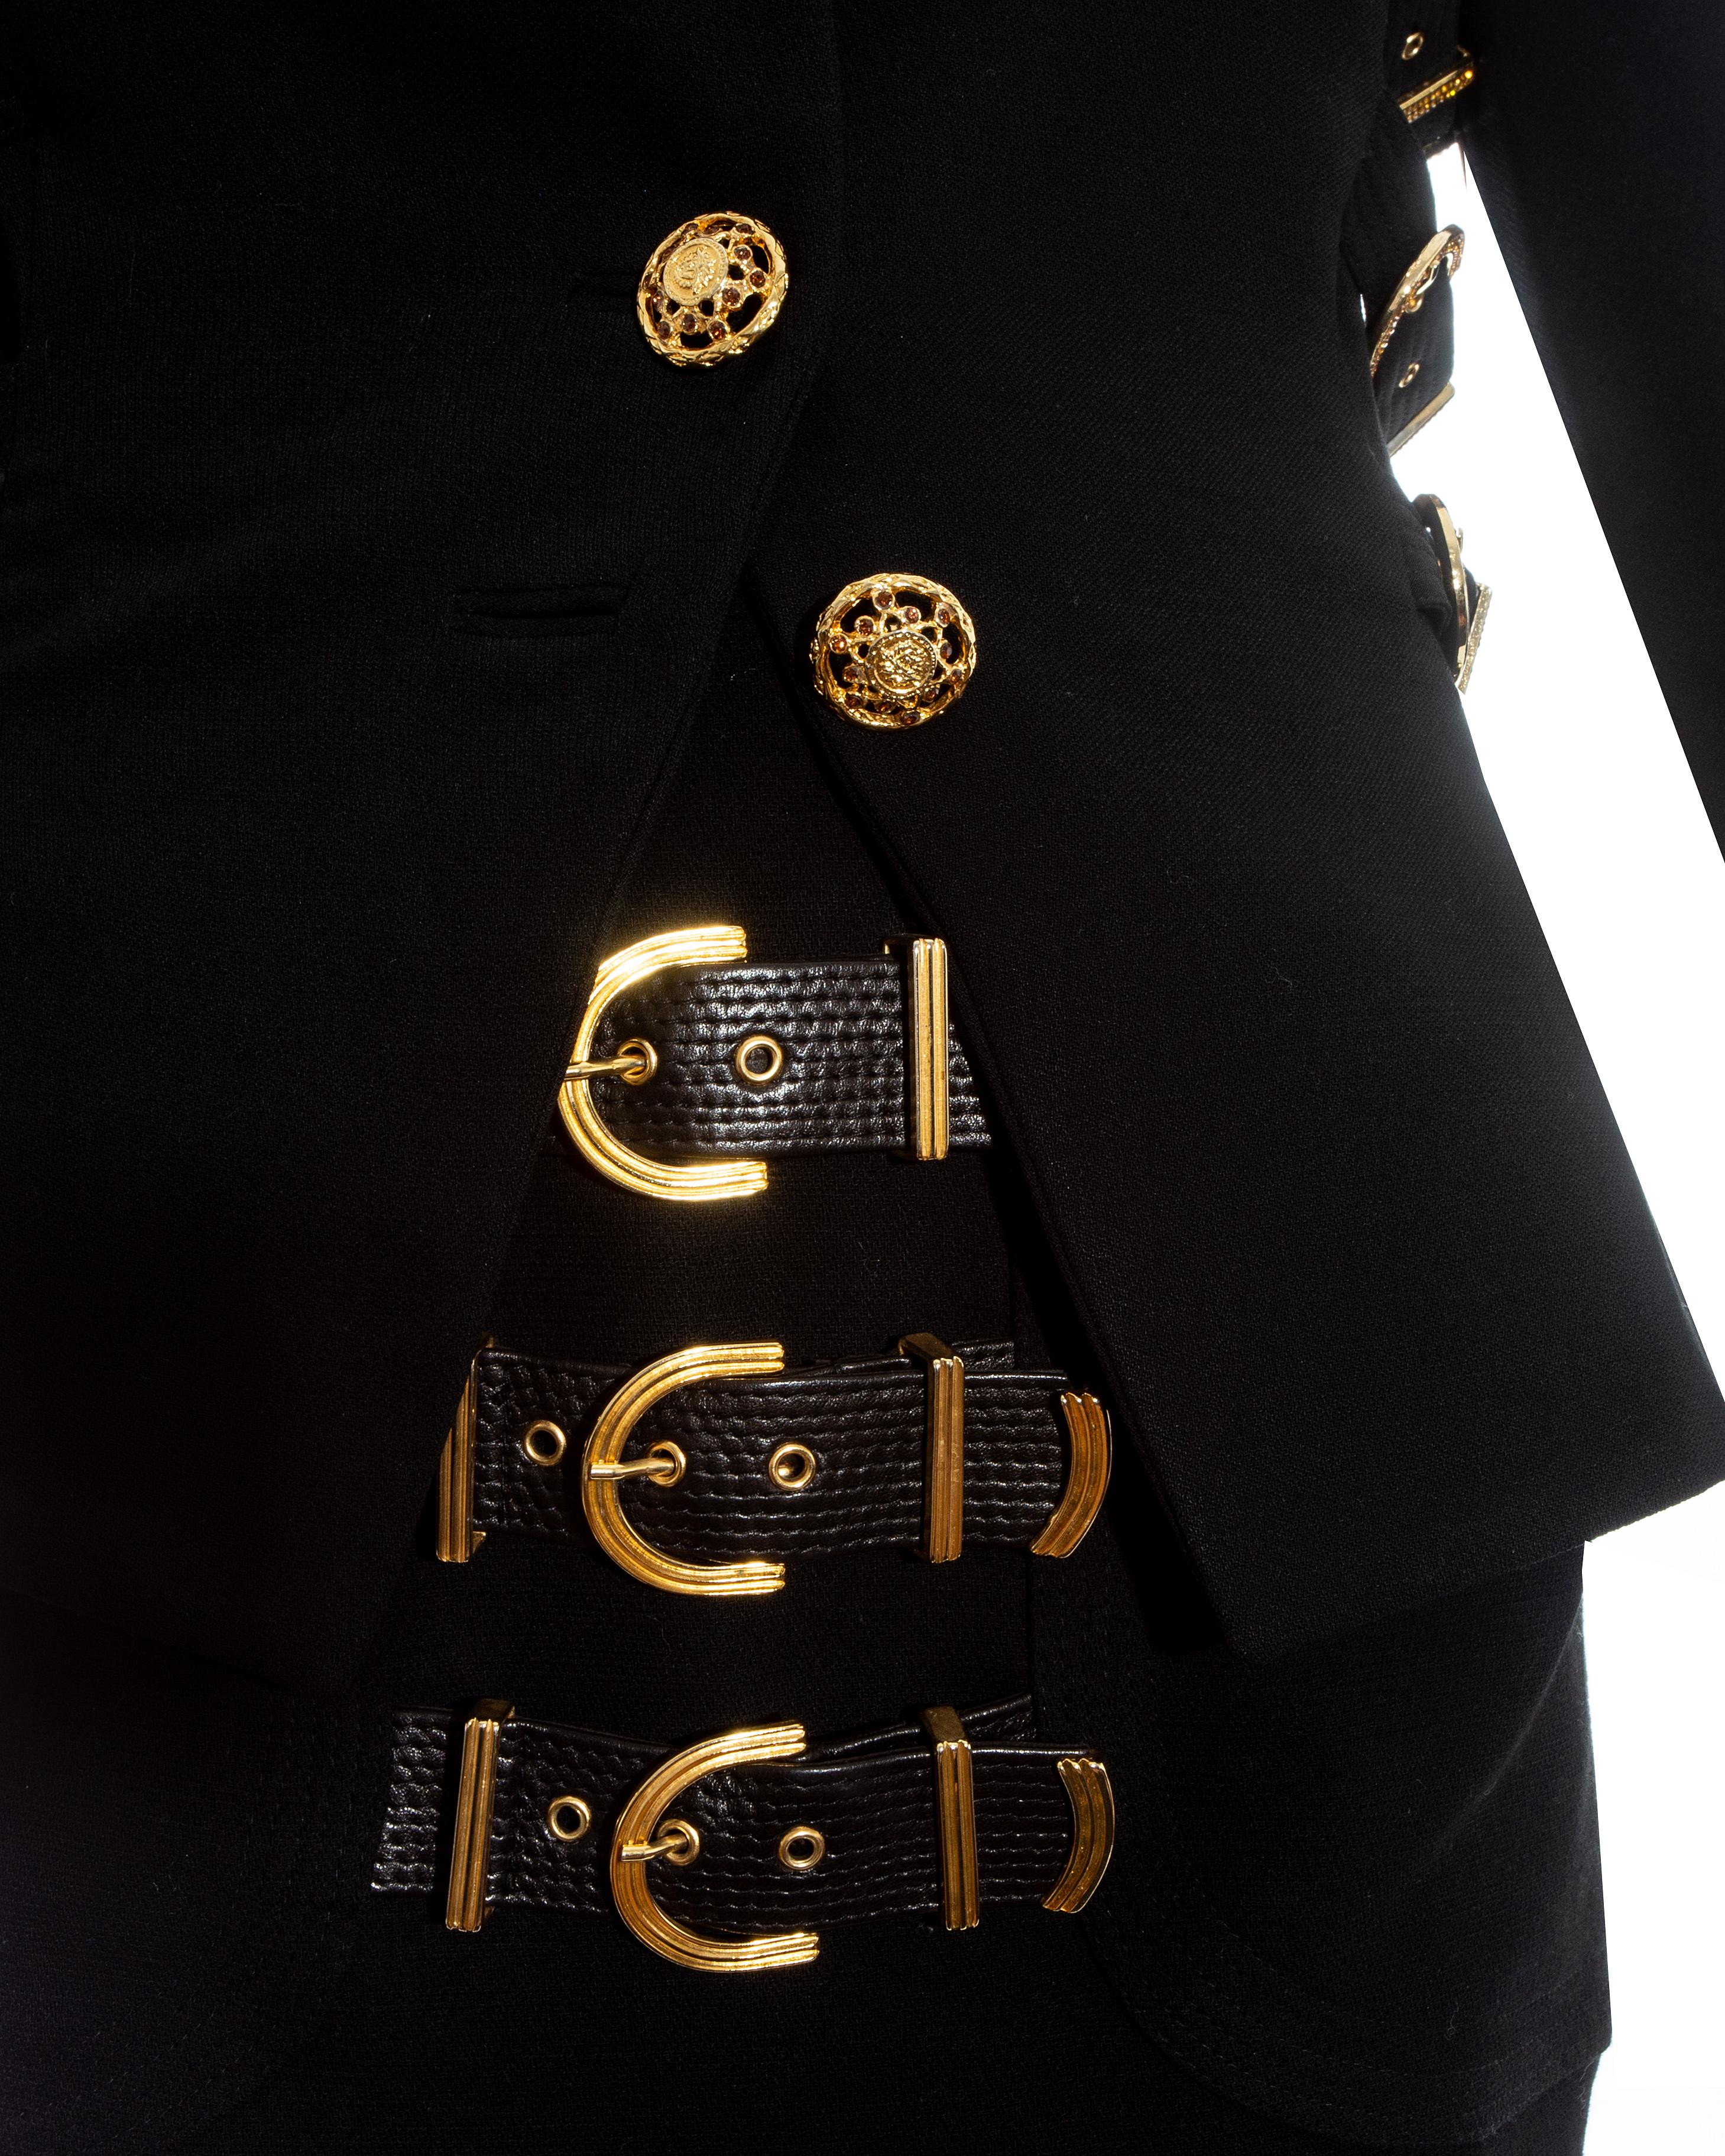 Women's Gianni Versace black wool skirt suit with gold bondage buckles, fw 1992